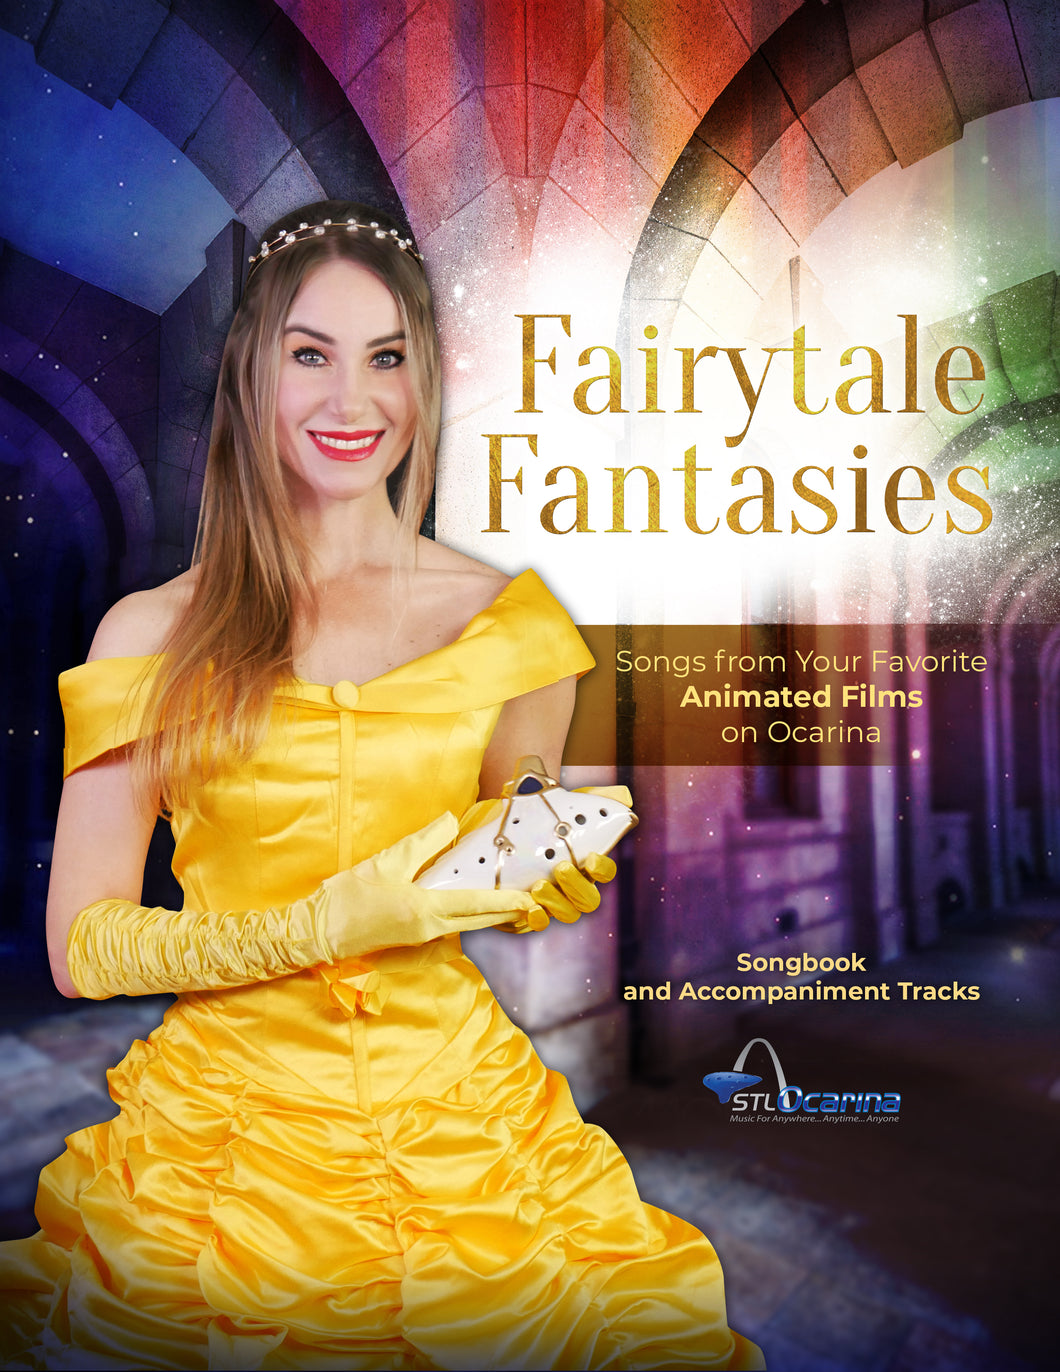 Fairytale Fantasies: Songs from Your Favorite Animated Films on Ocarina - Songbook and Accompaniment Tracks